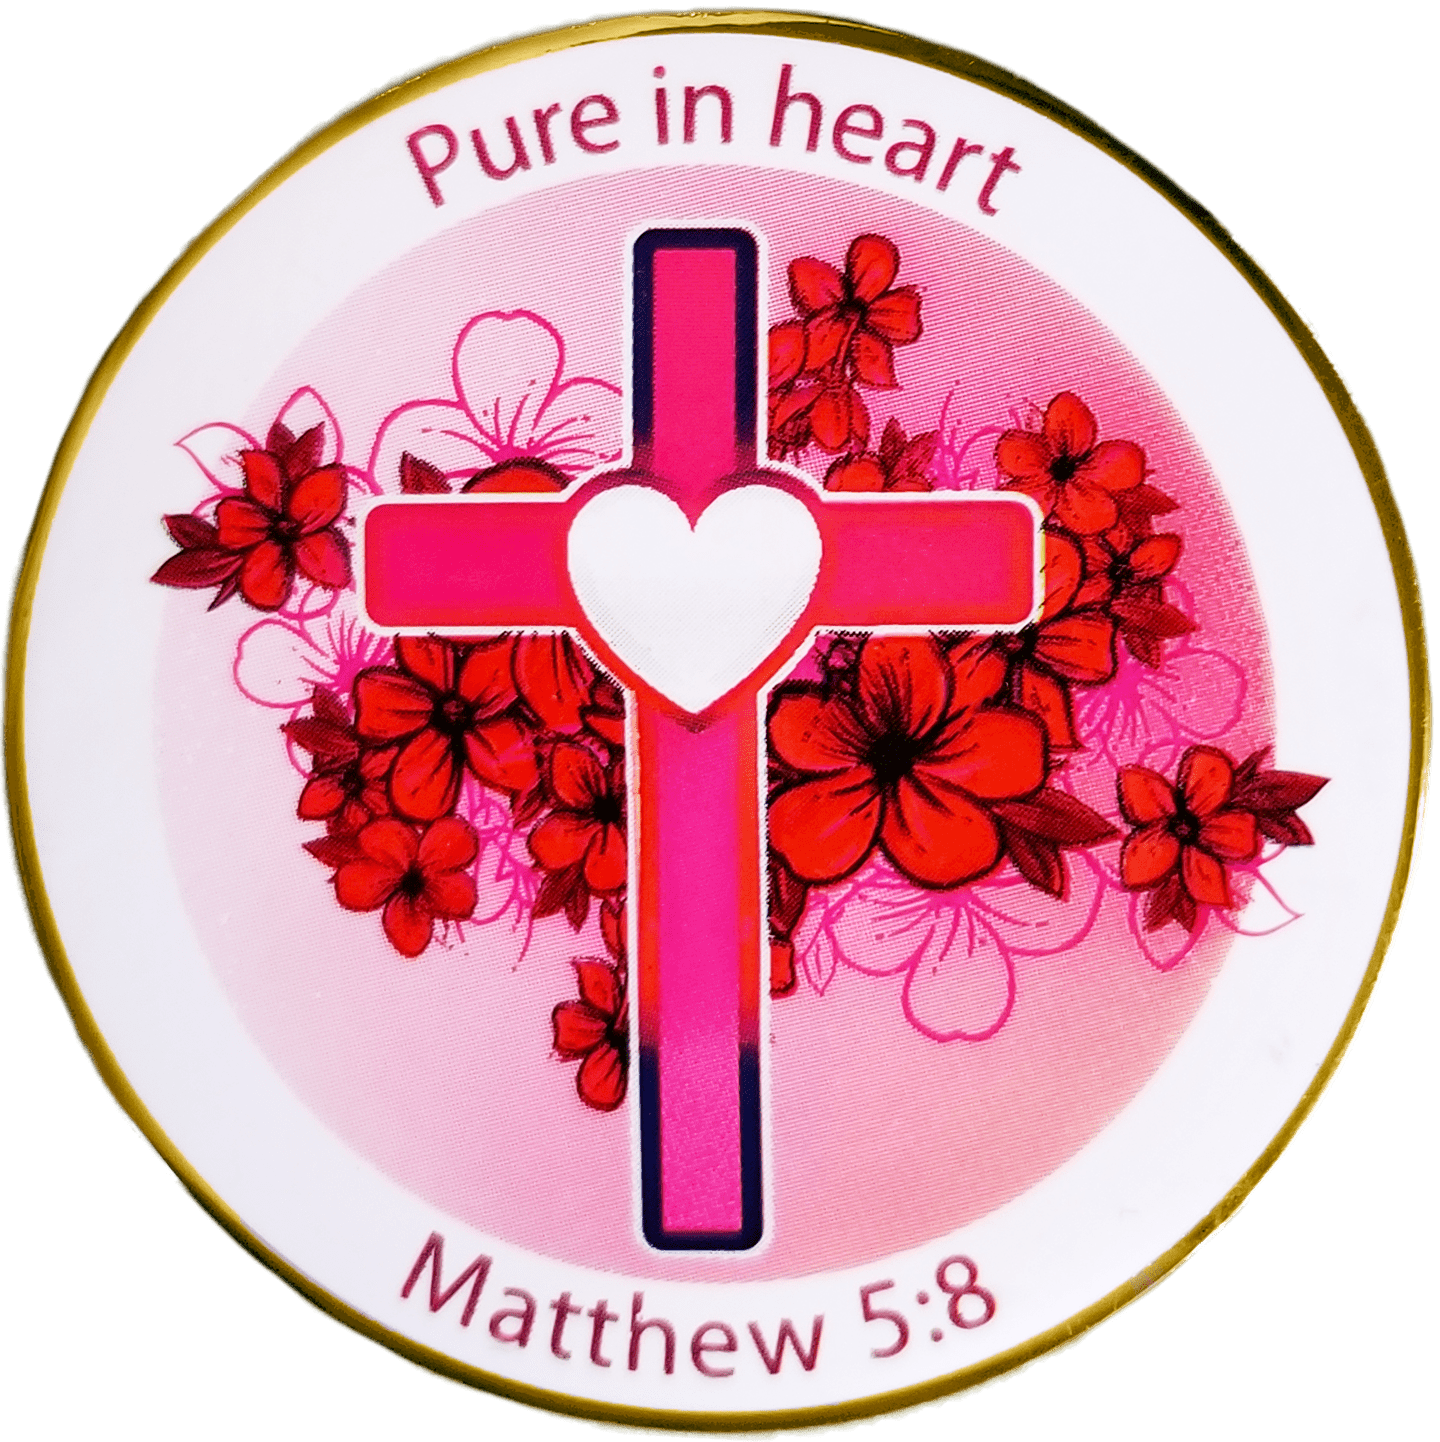 Front: Pink Heart Cross and flowers, with text, " Pure in heart" / " Matthew 5:8"